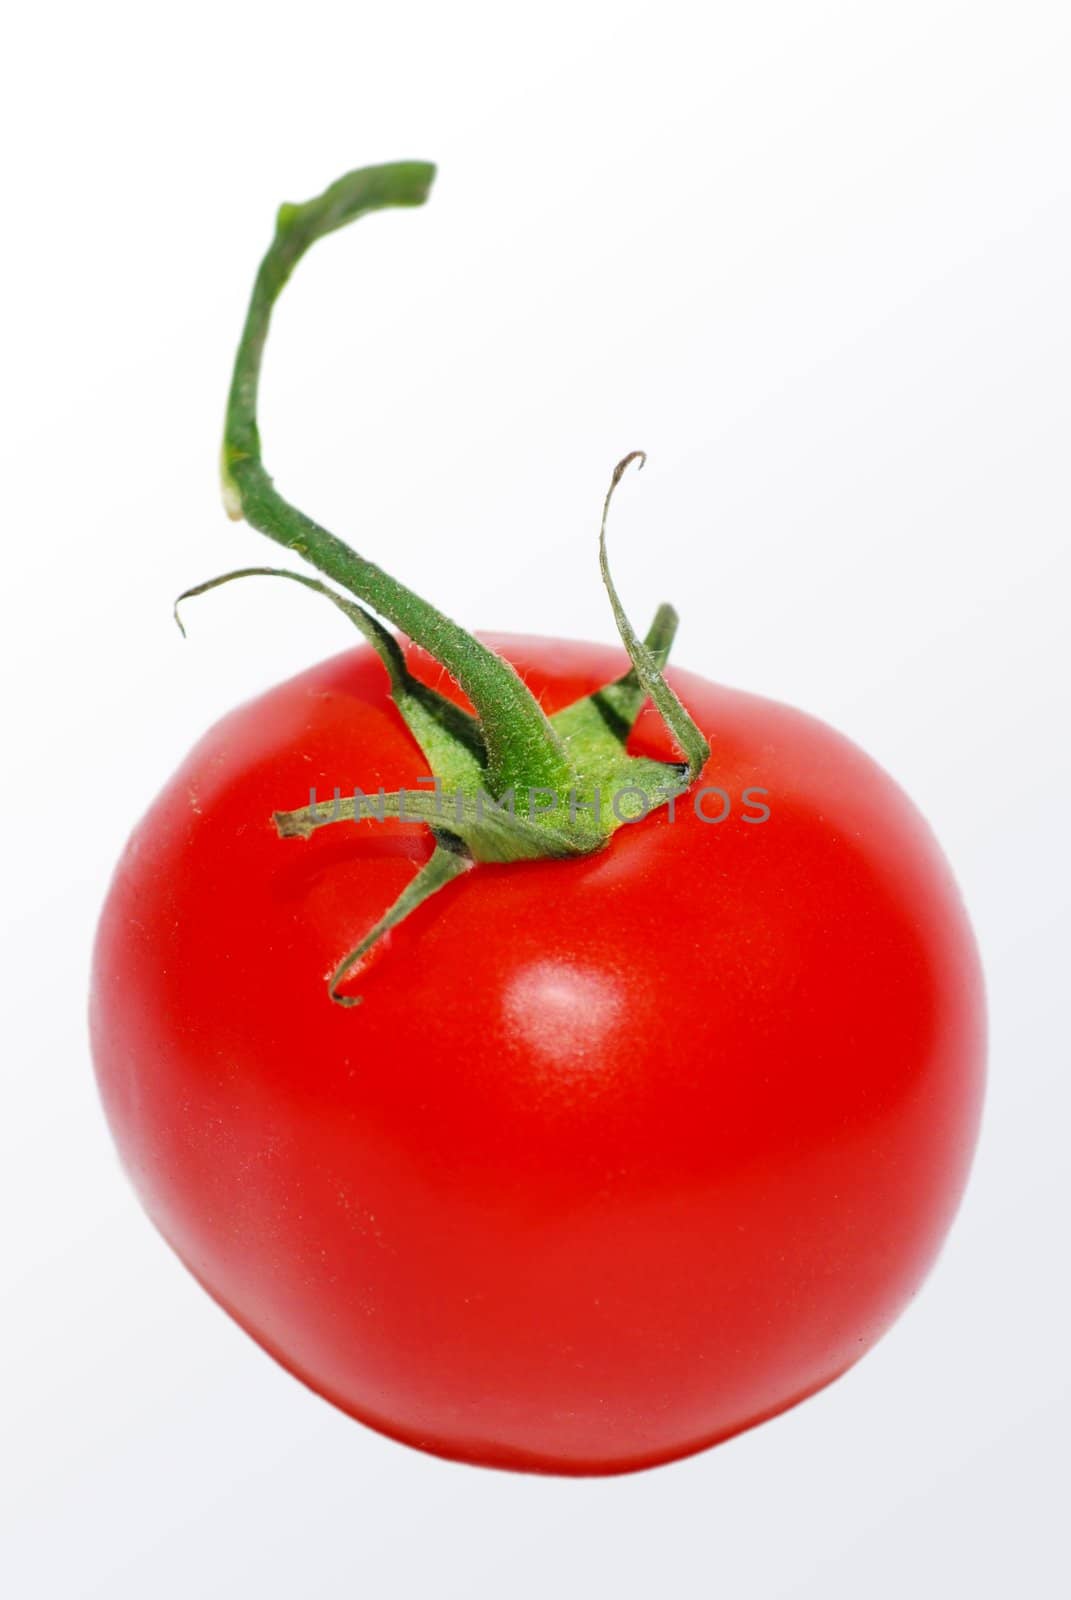 a detail picture of a tomato